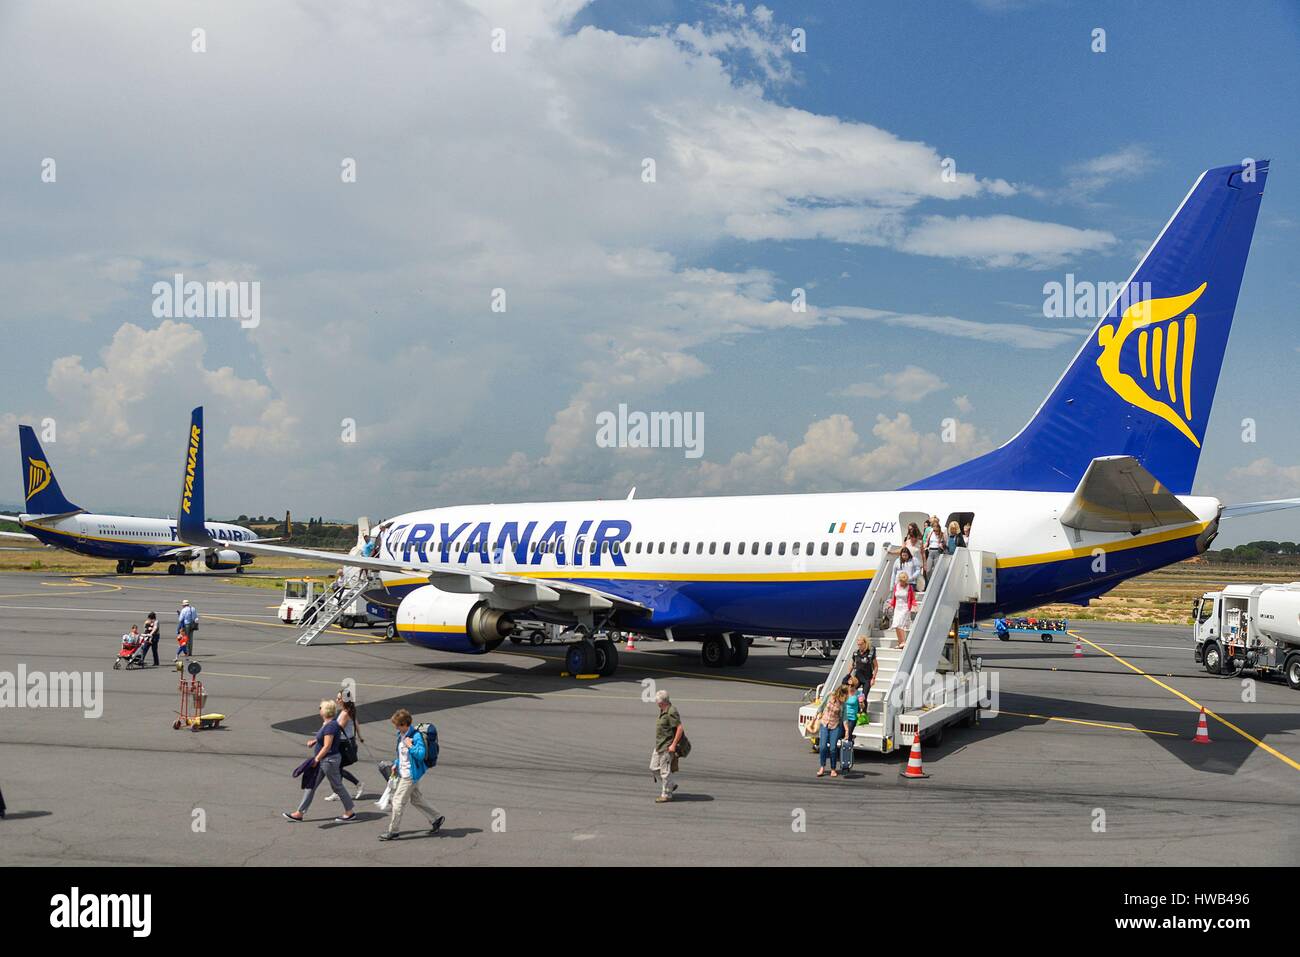 France, Herault, Vias, passengers disembarking from a plane on the tarmac Stock Photo